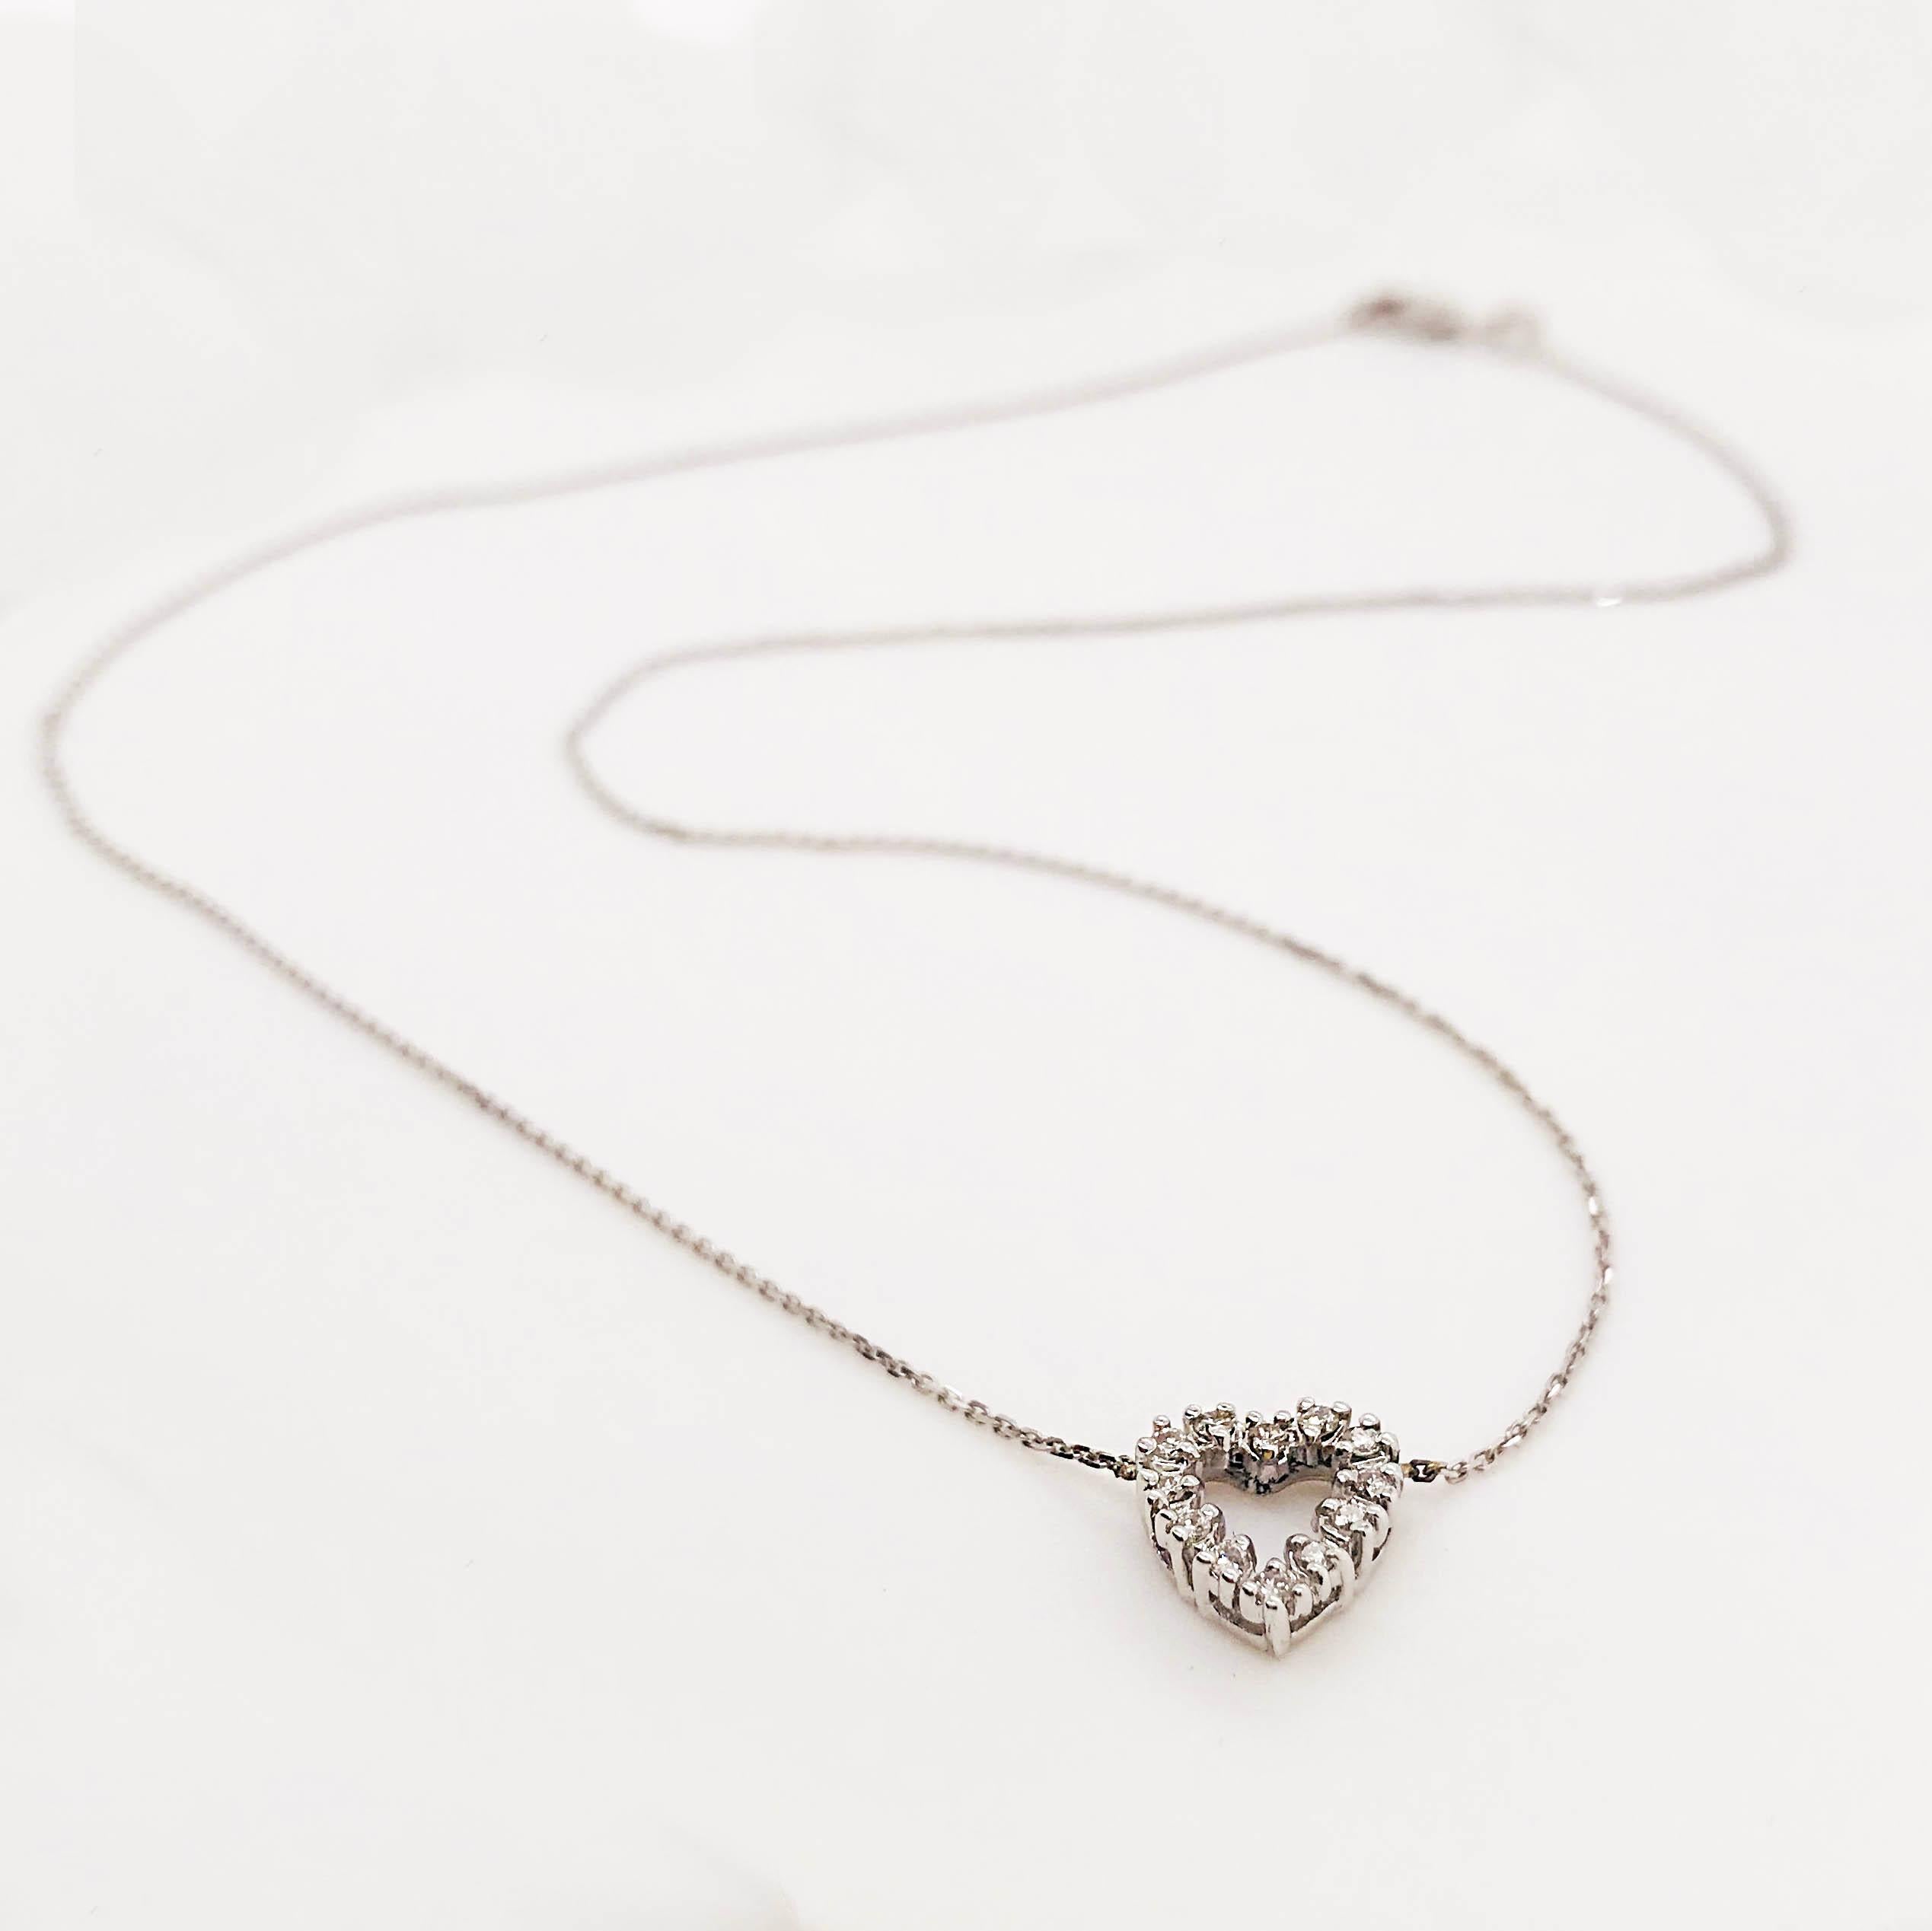 The beautiful diamond heart necklace is so adorable! This diamond necklace is the perfect gift for Mother's Day, Graduation, Birthday's or Treat Yourself Day! 
Diamond necklaces are a staple. You deserve one and you deserve the best! The diamond